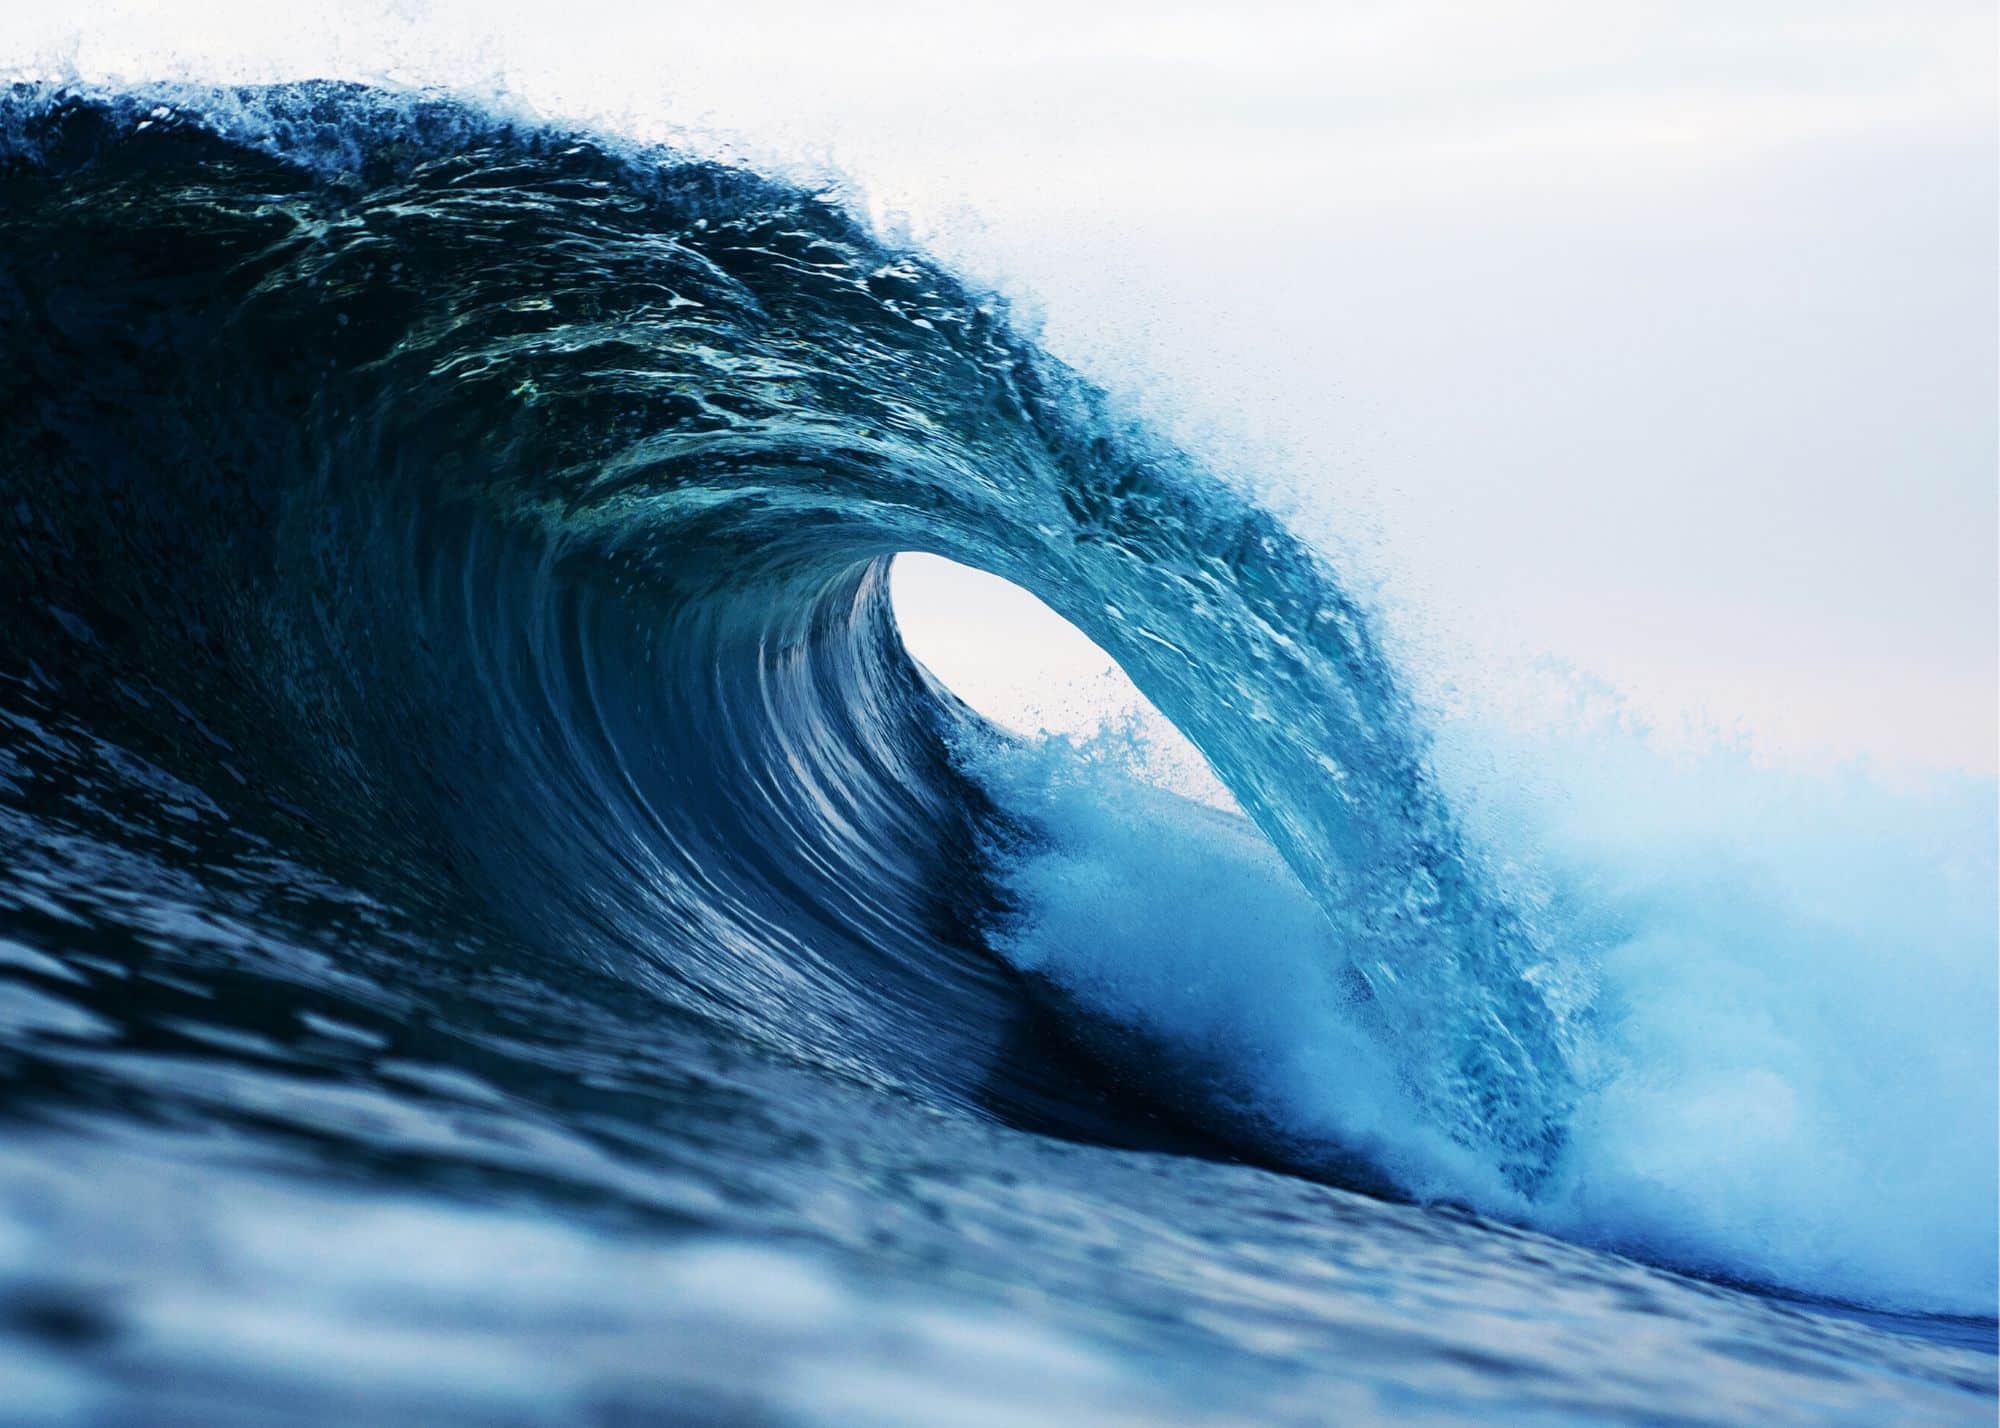 Learn How to Catch and Surf a Green Wave